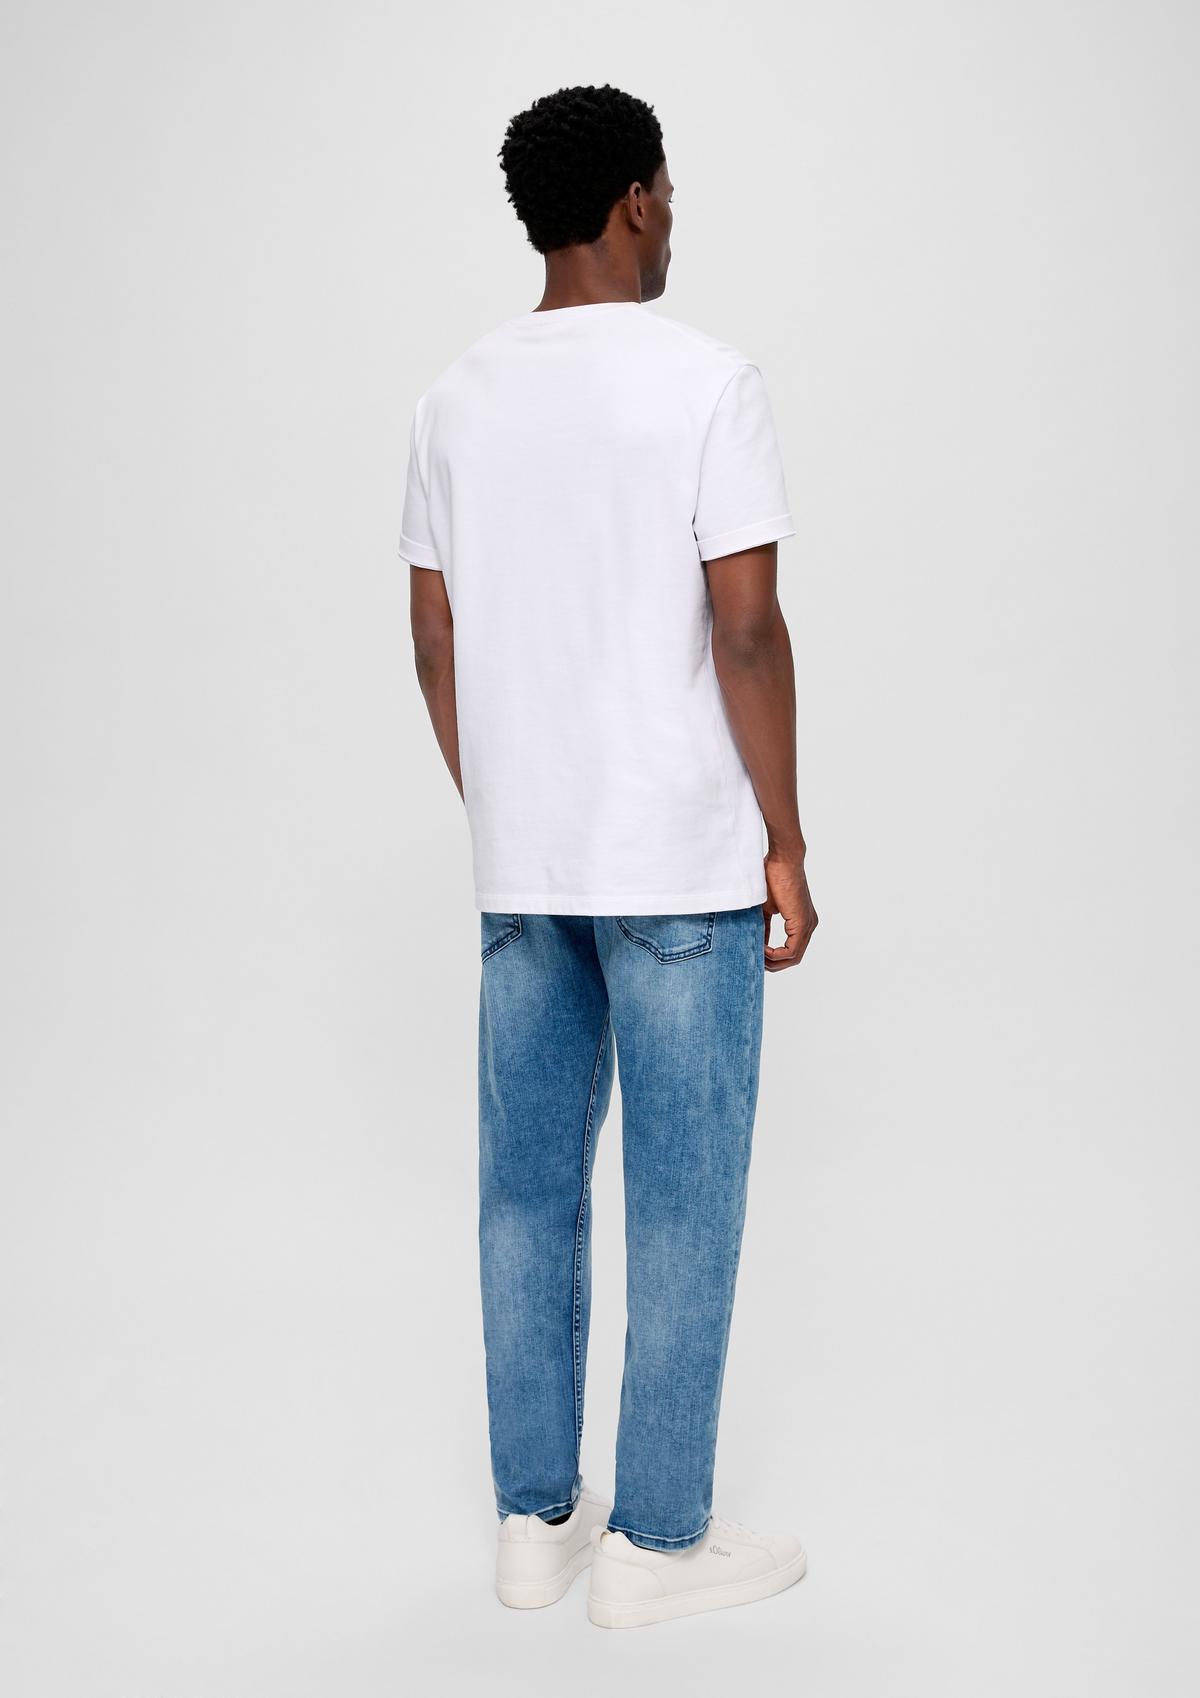 s.Oliver Jeans Mauro / Regular Fit / High Rise / Tapered Leg 